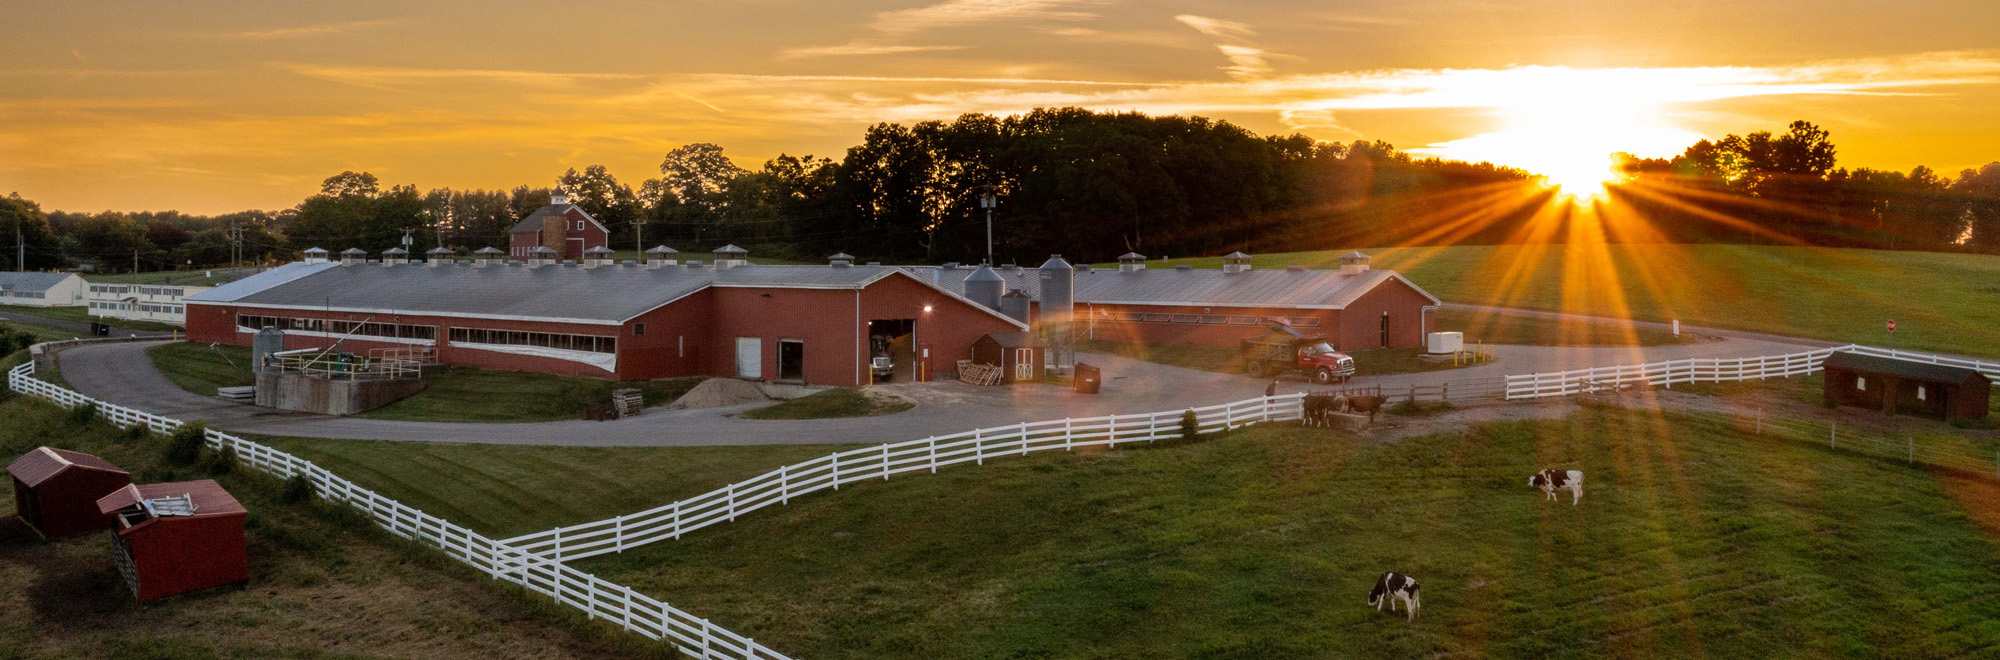 view of the Kellogg Dairy Center at sunset